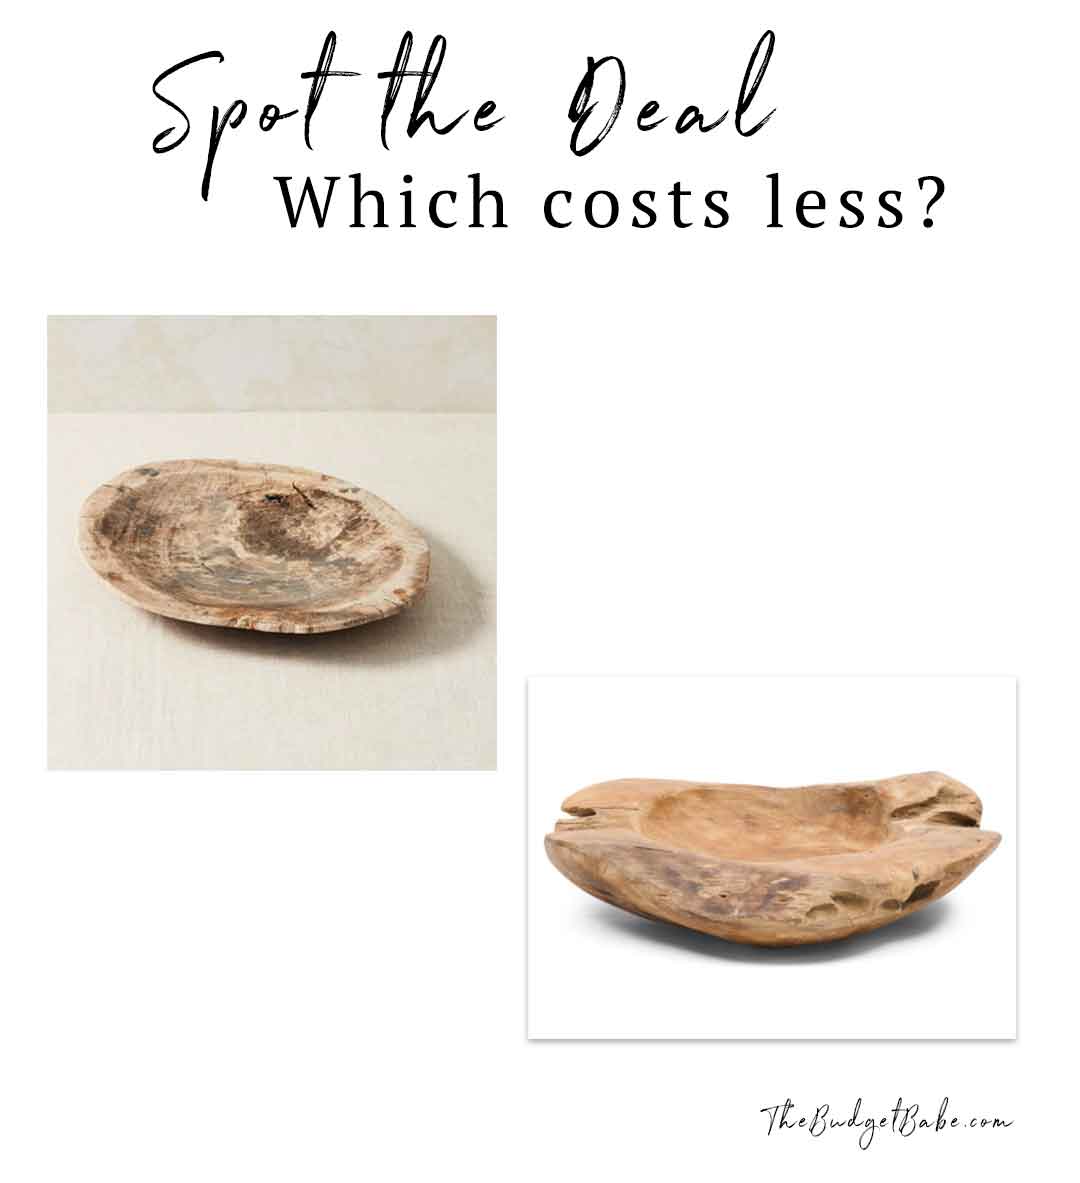 Can you guess which wood bowl costs less?